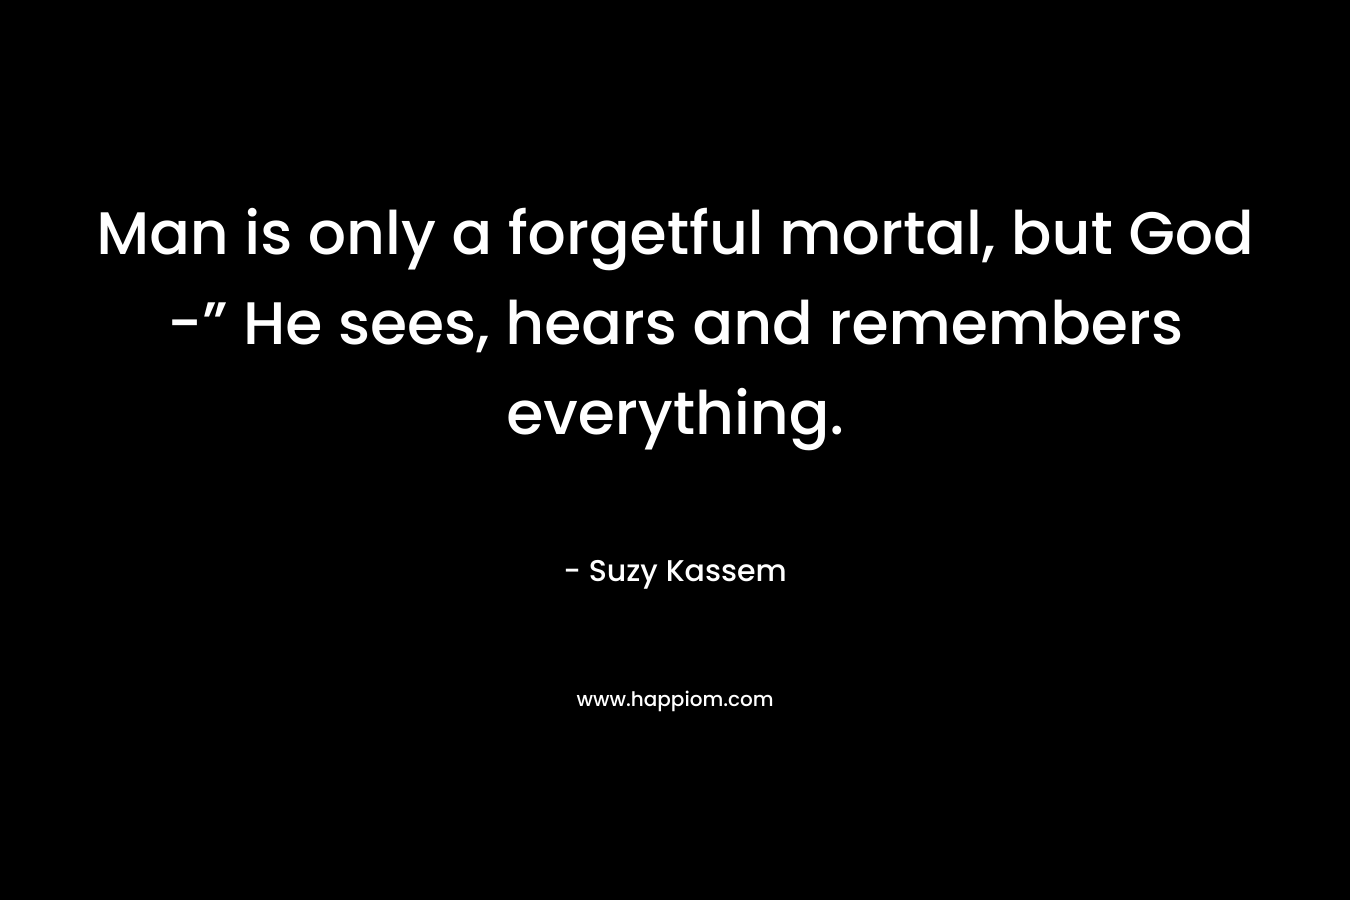 Man is only a forgetful mortal, but God -” He sees, hears and remembers everything.